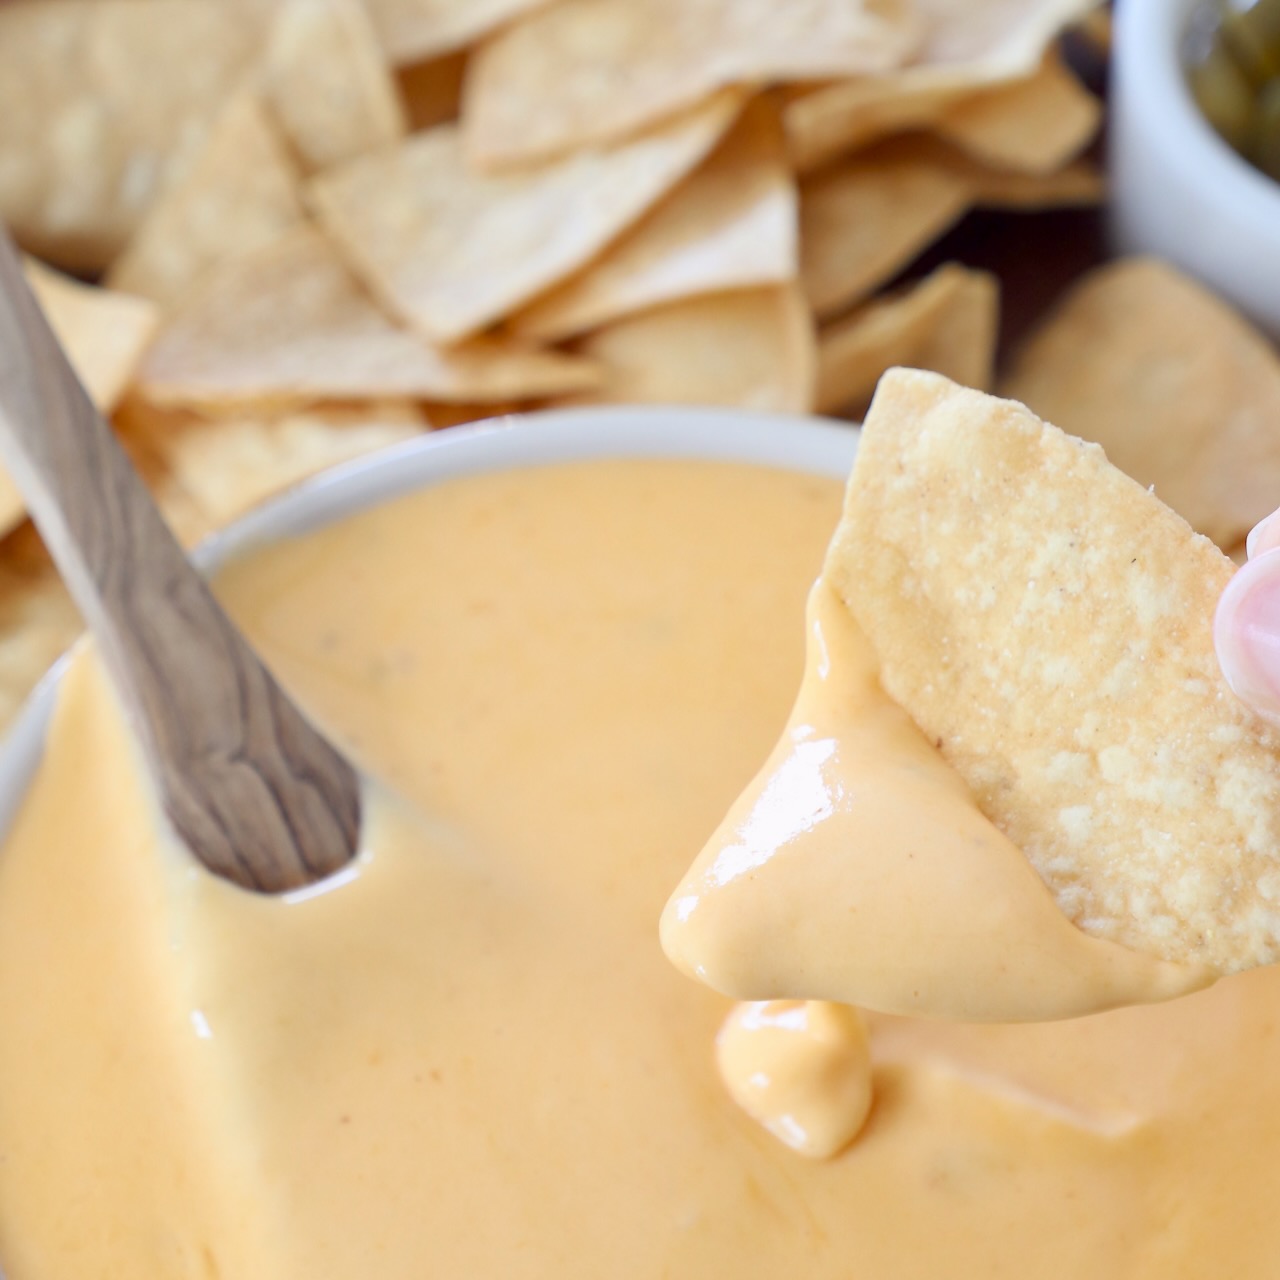 Slow Cooker Nacho Dip + Video - The Slow Roasted Italian